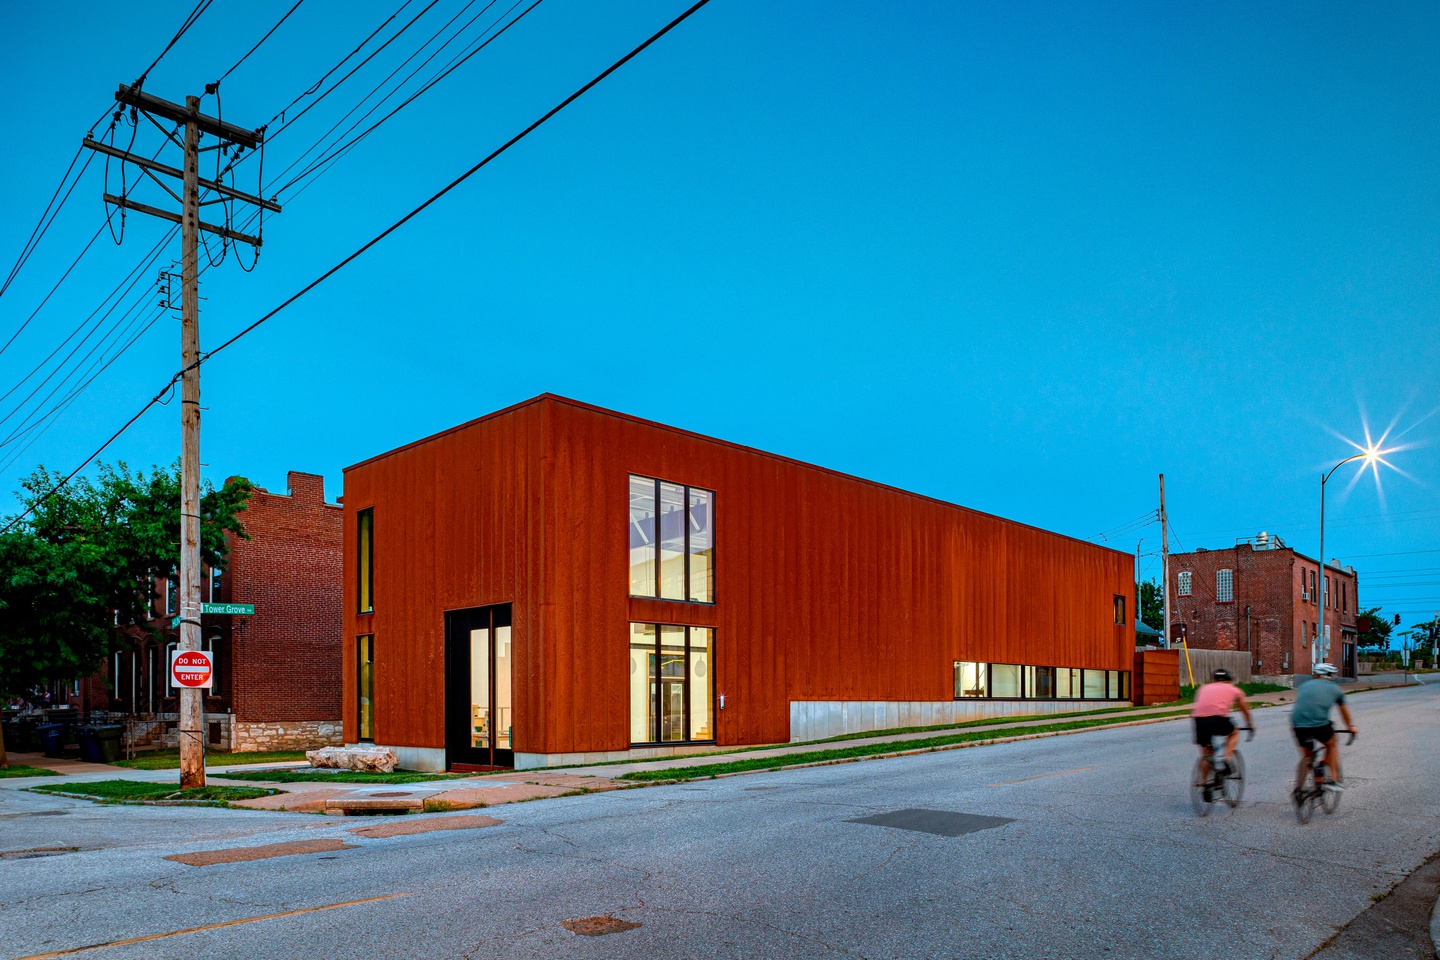 Photo of a modular, two-story building on a residential street in St. Louis